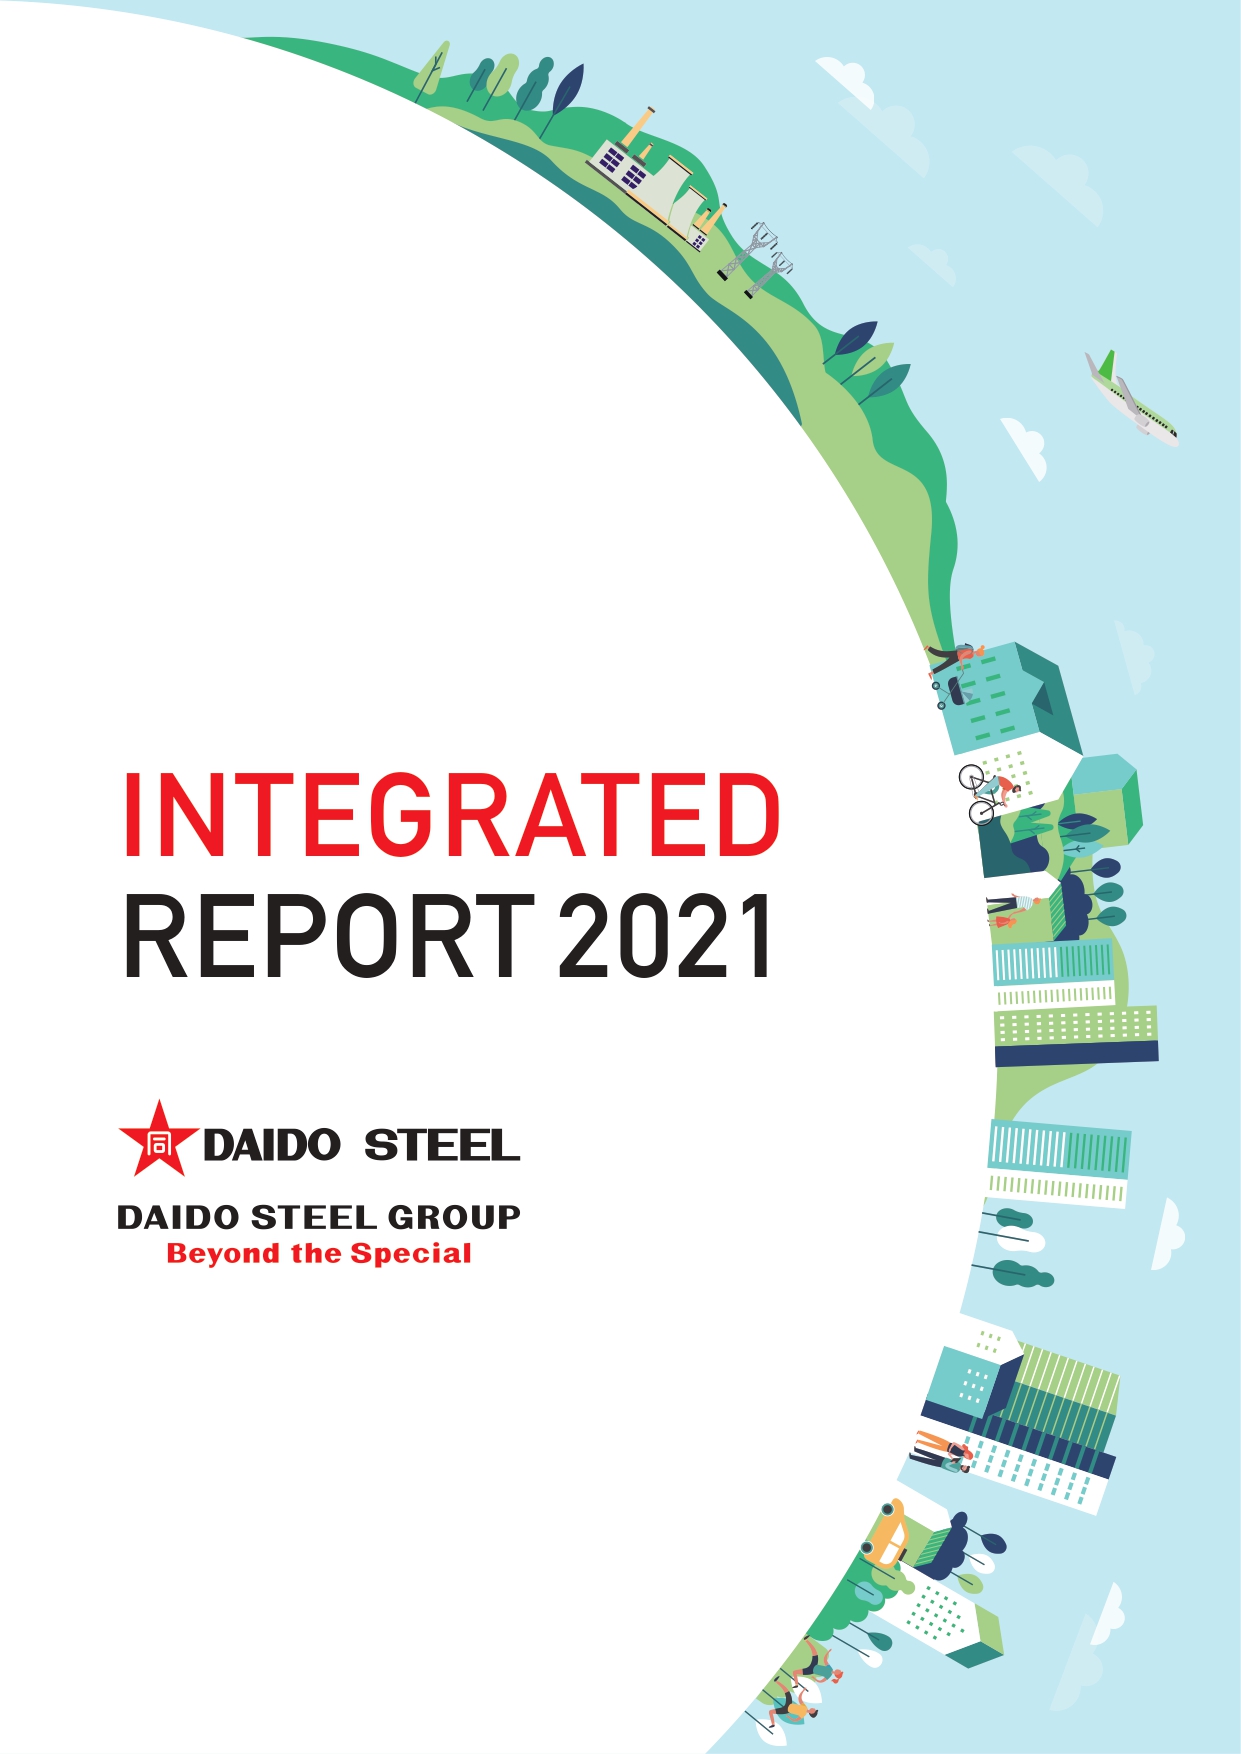 INTEGRATED REPORT 2021